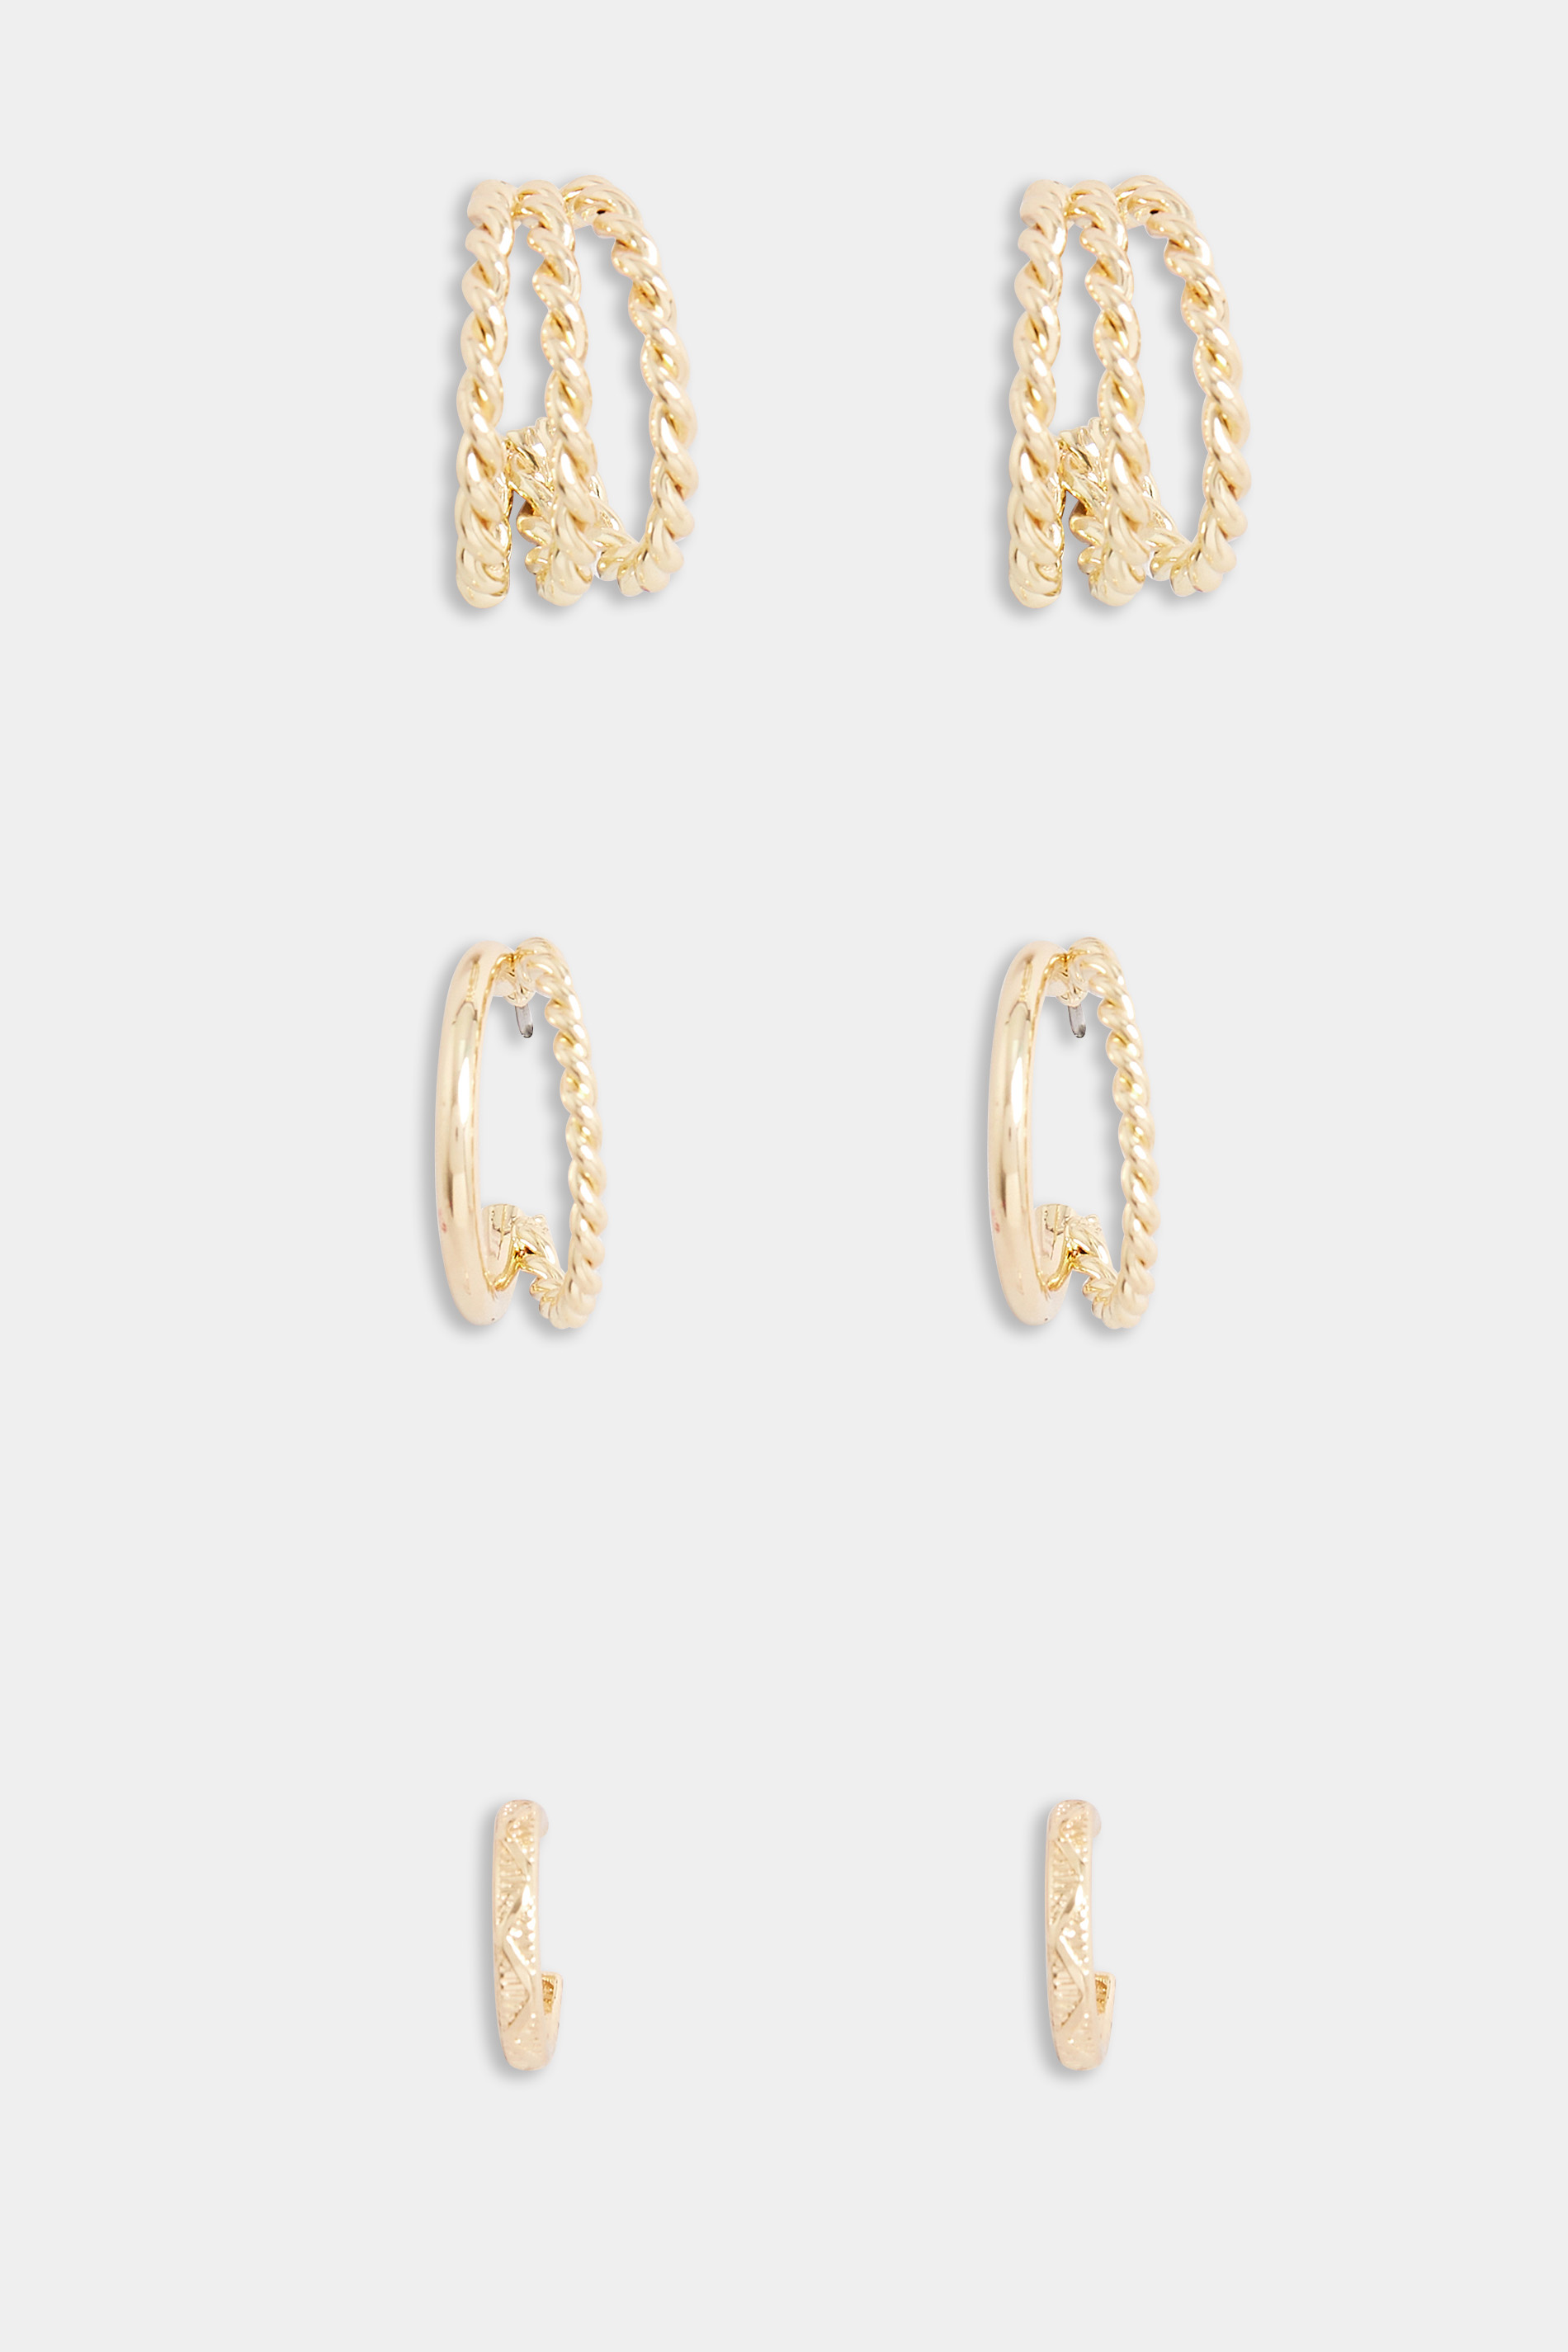 3 PACK Gold Tone Textured Hoop Earring Set | Yours Clothing 3